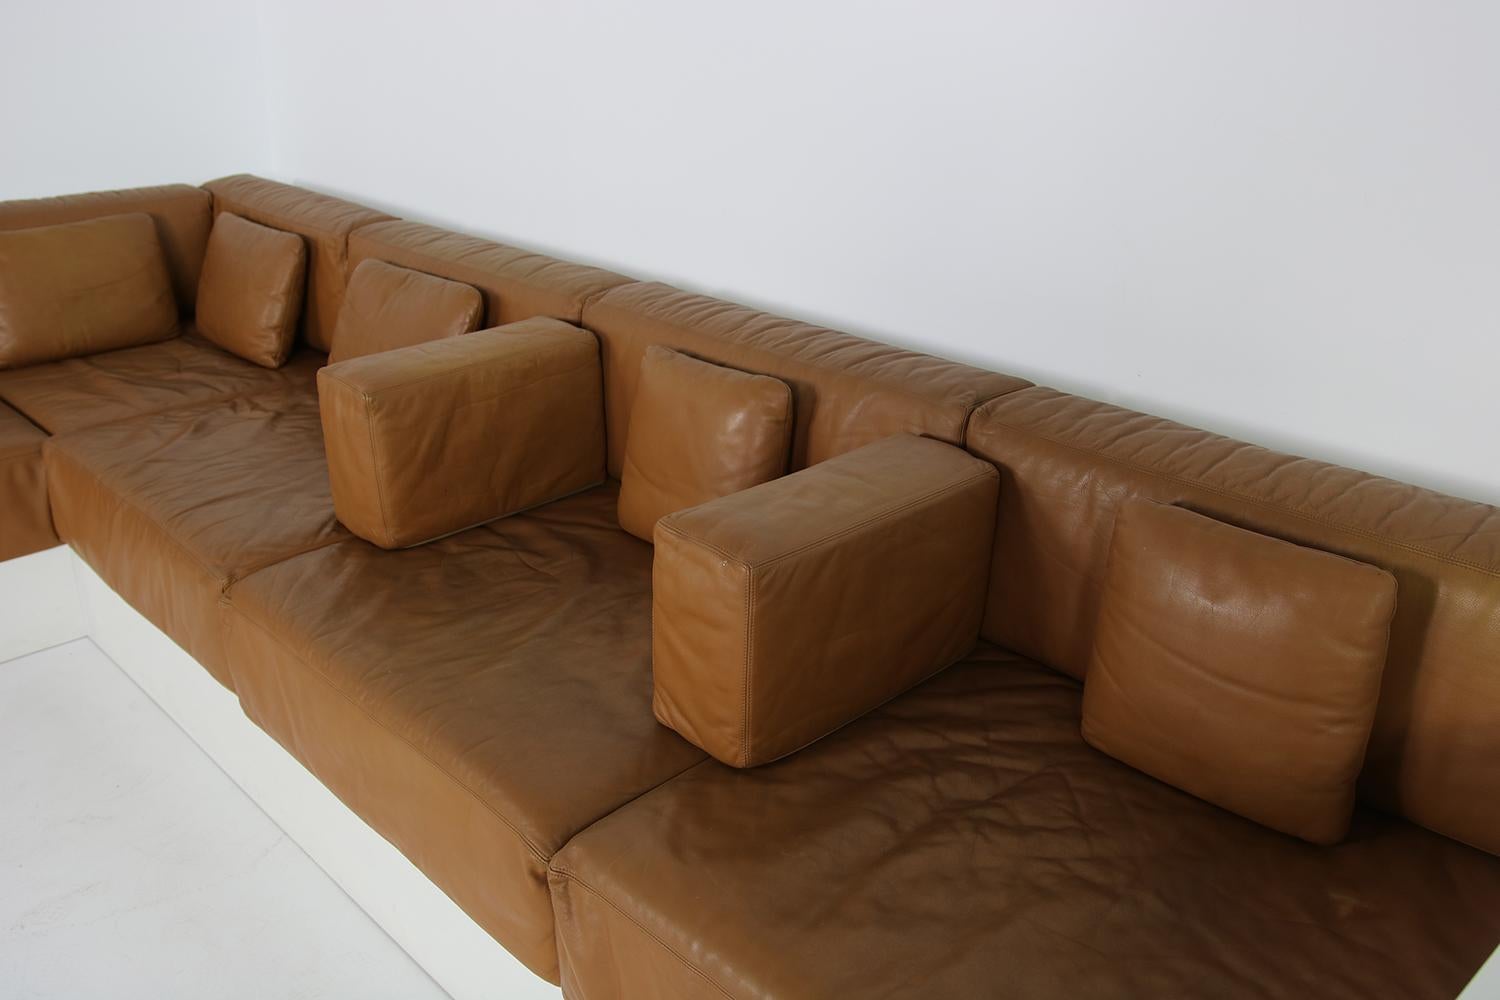 Unique & Large 1960s Landscape Sofa & Chairs Brown Leather Made to Order 1969 For Sale 4